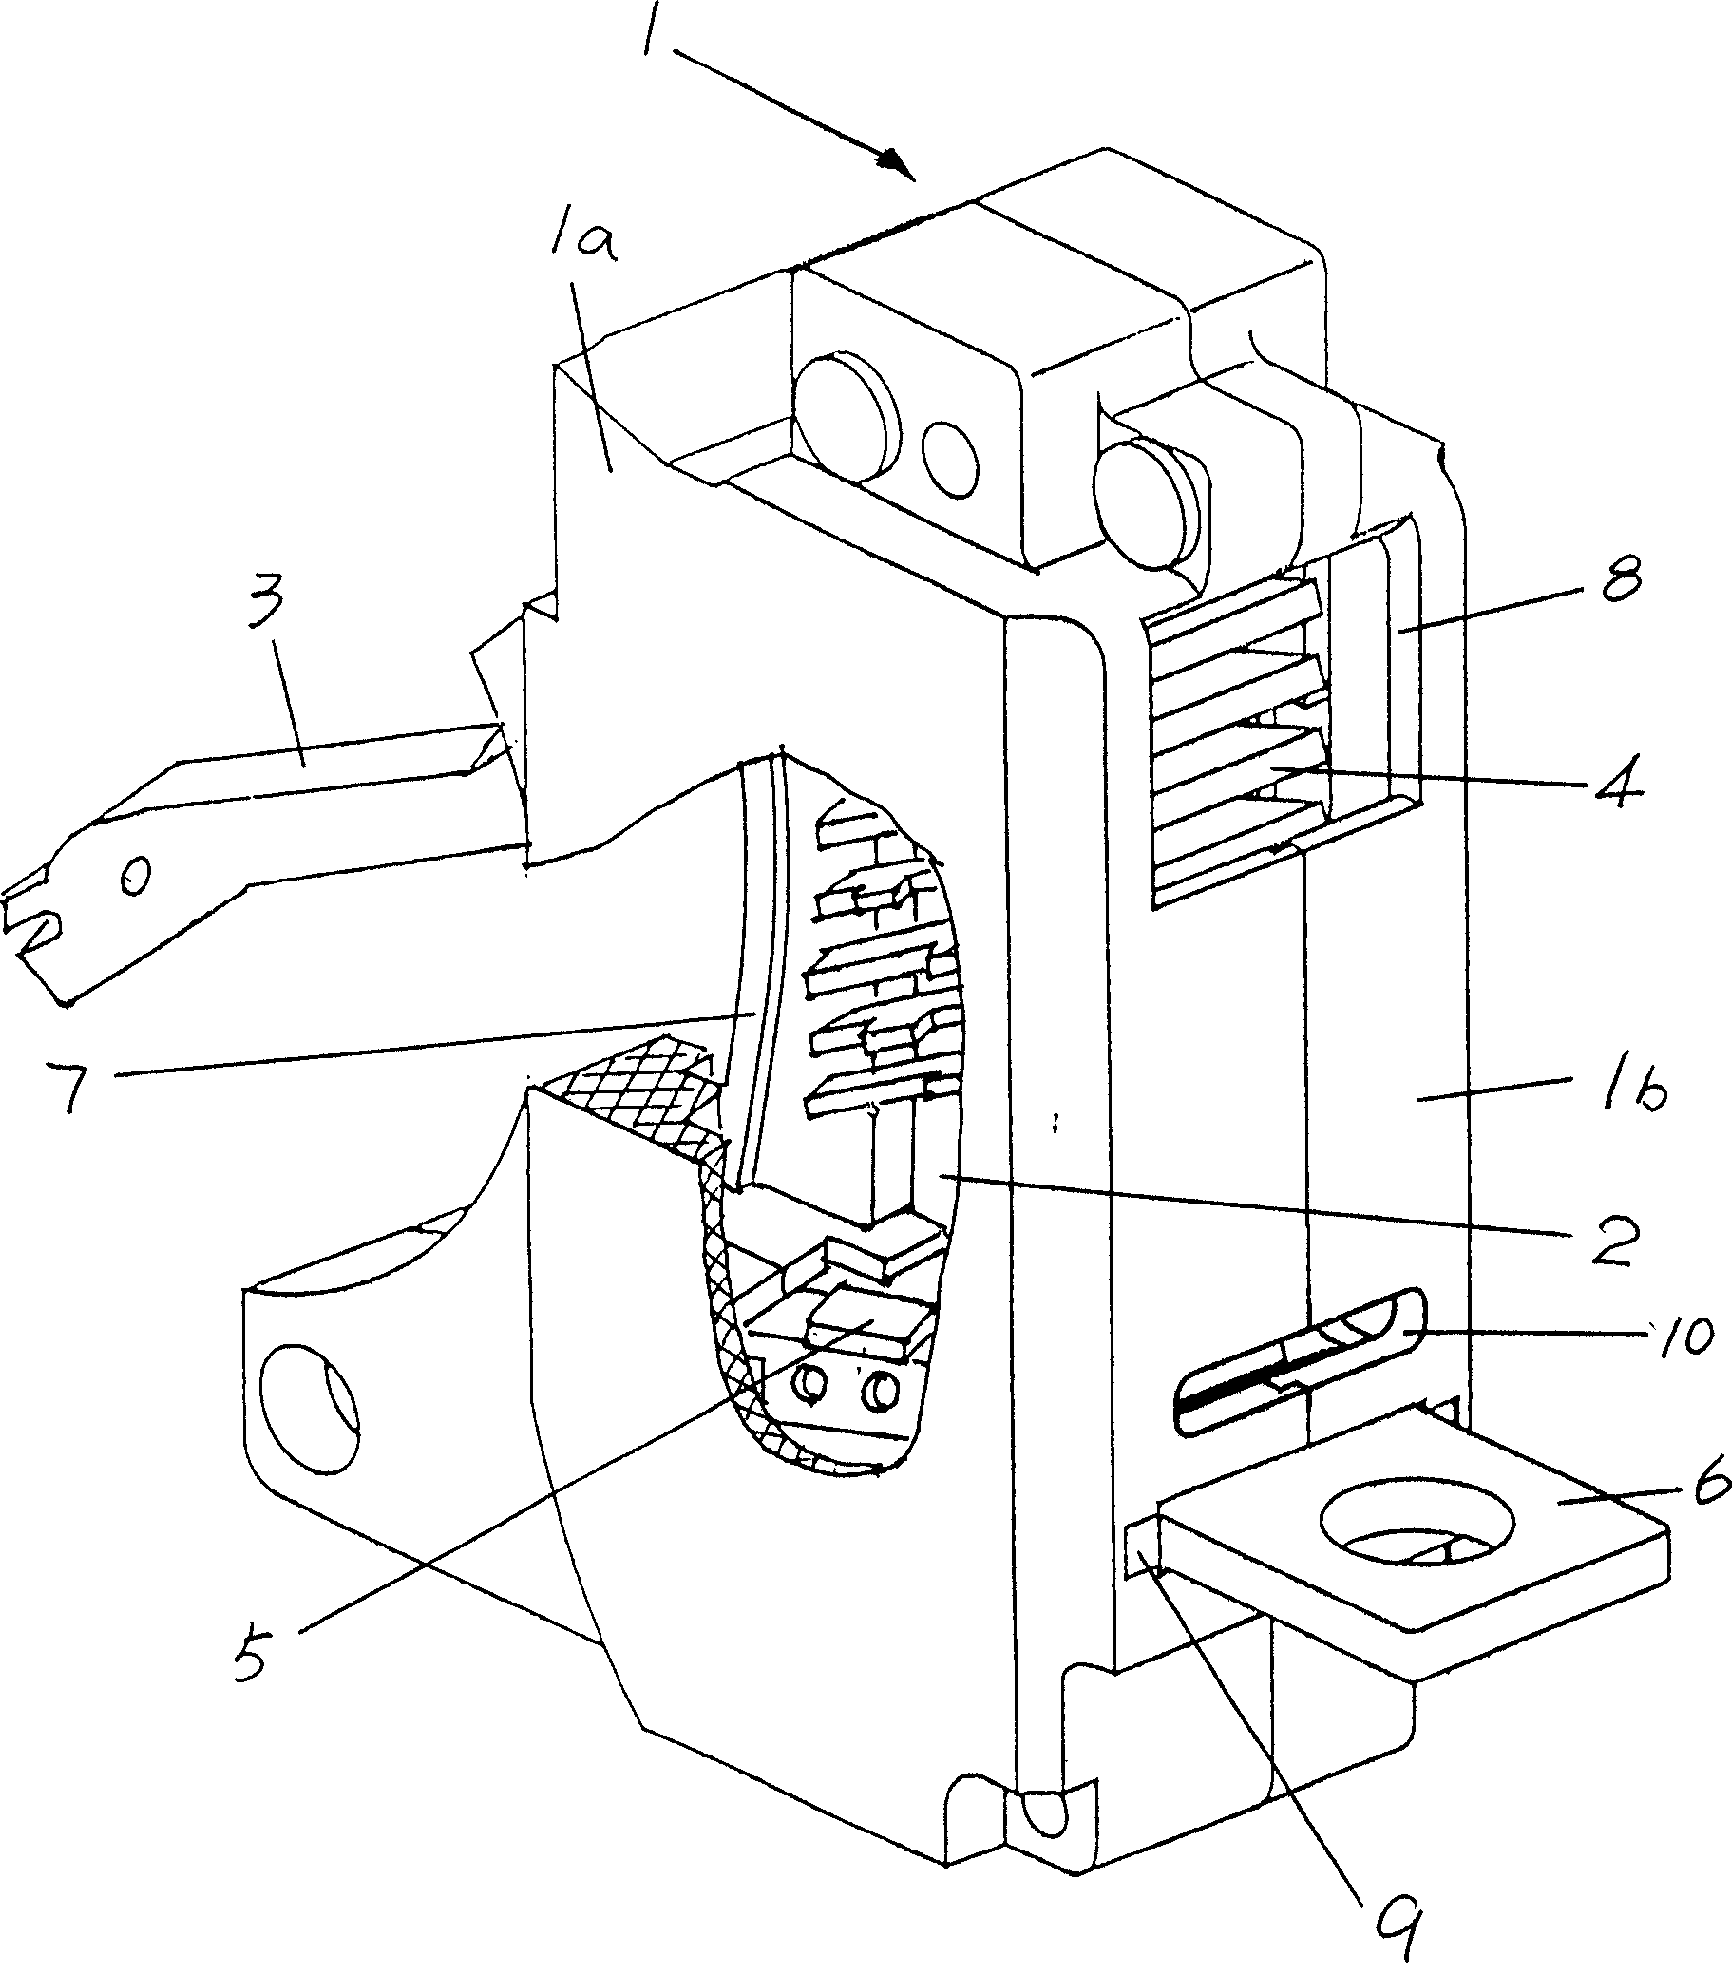 Arc-control device for circuit breaker